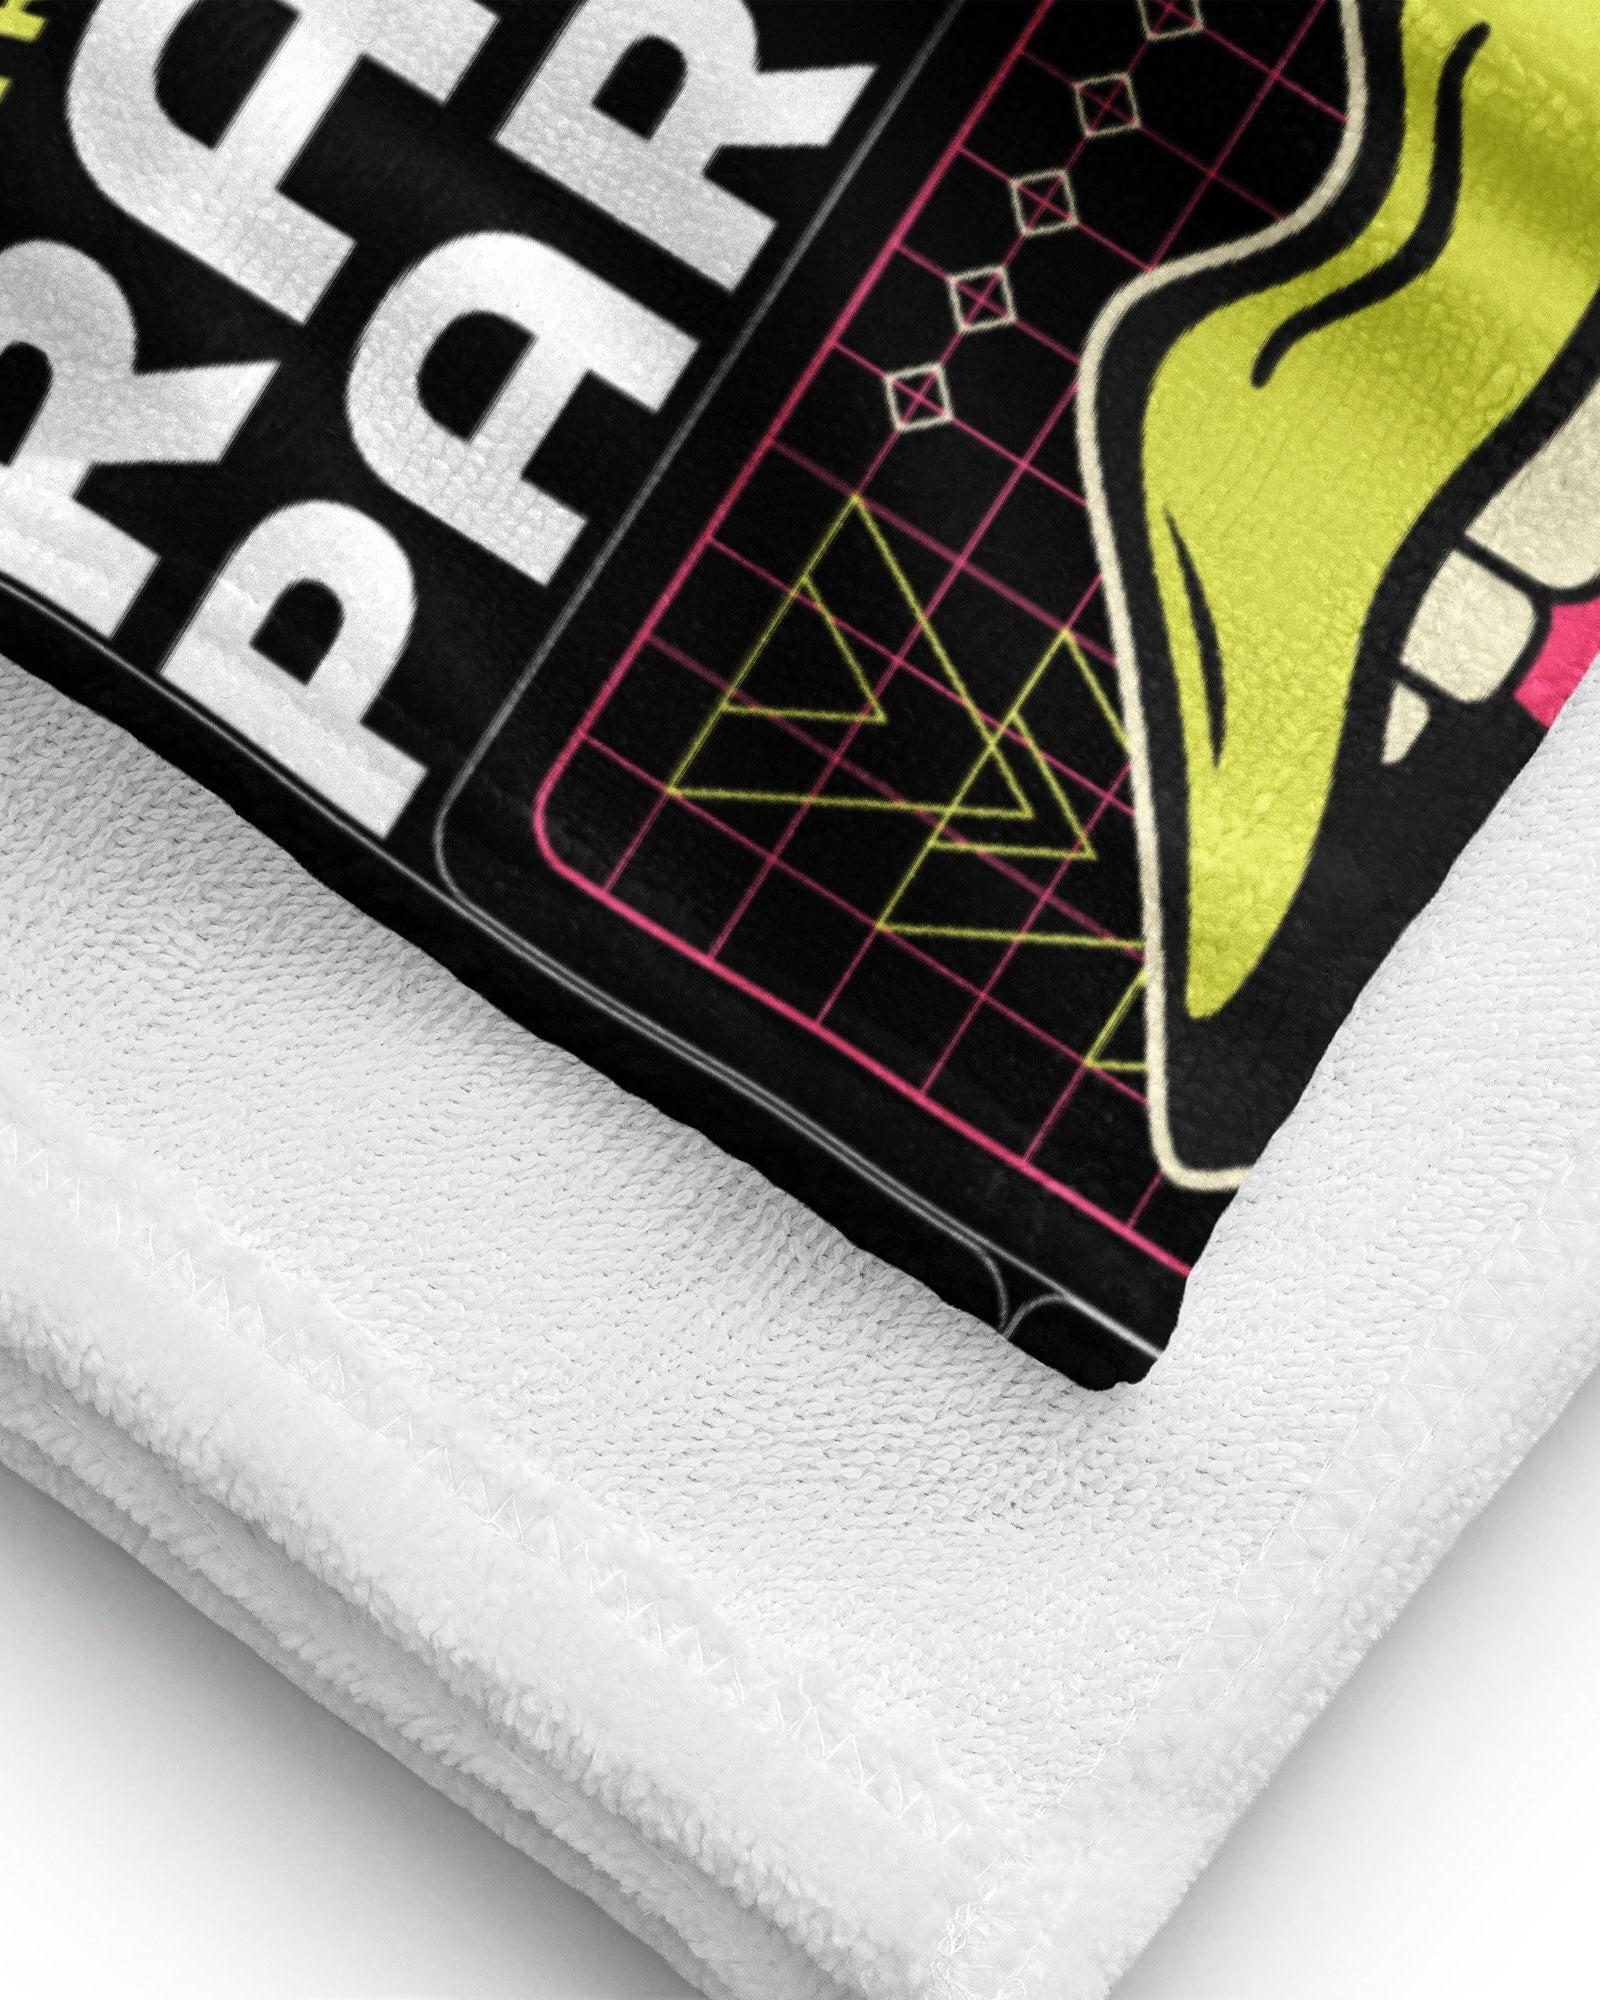 90's Rave Party Towel